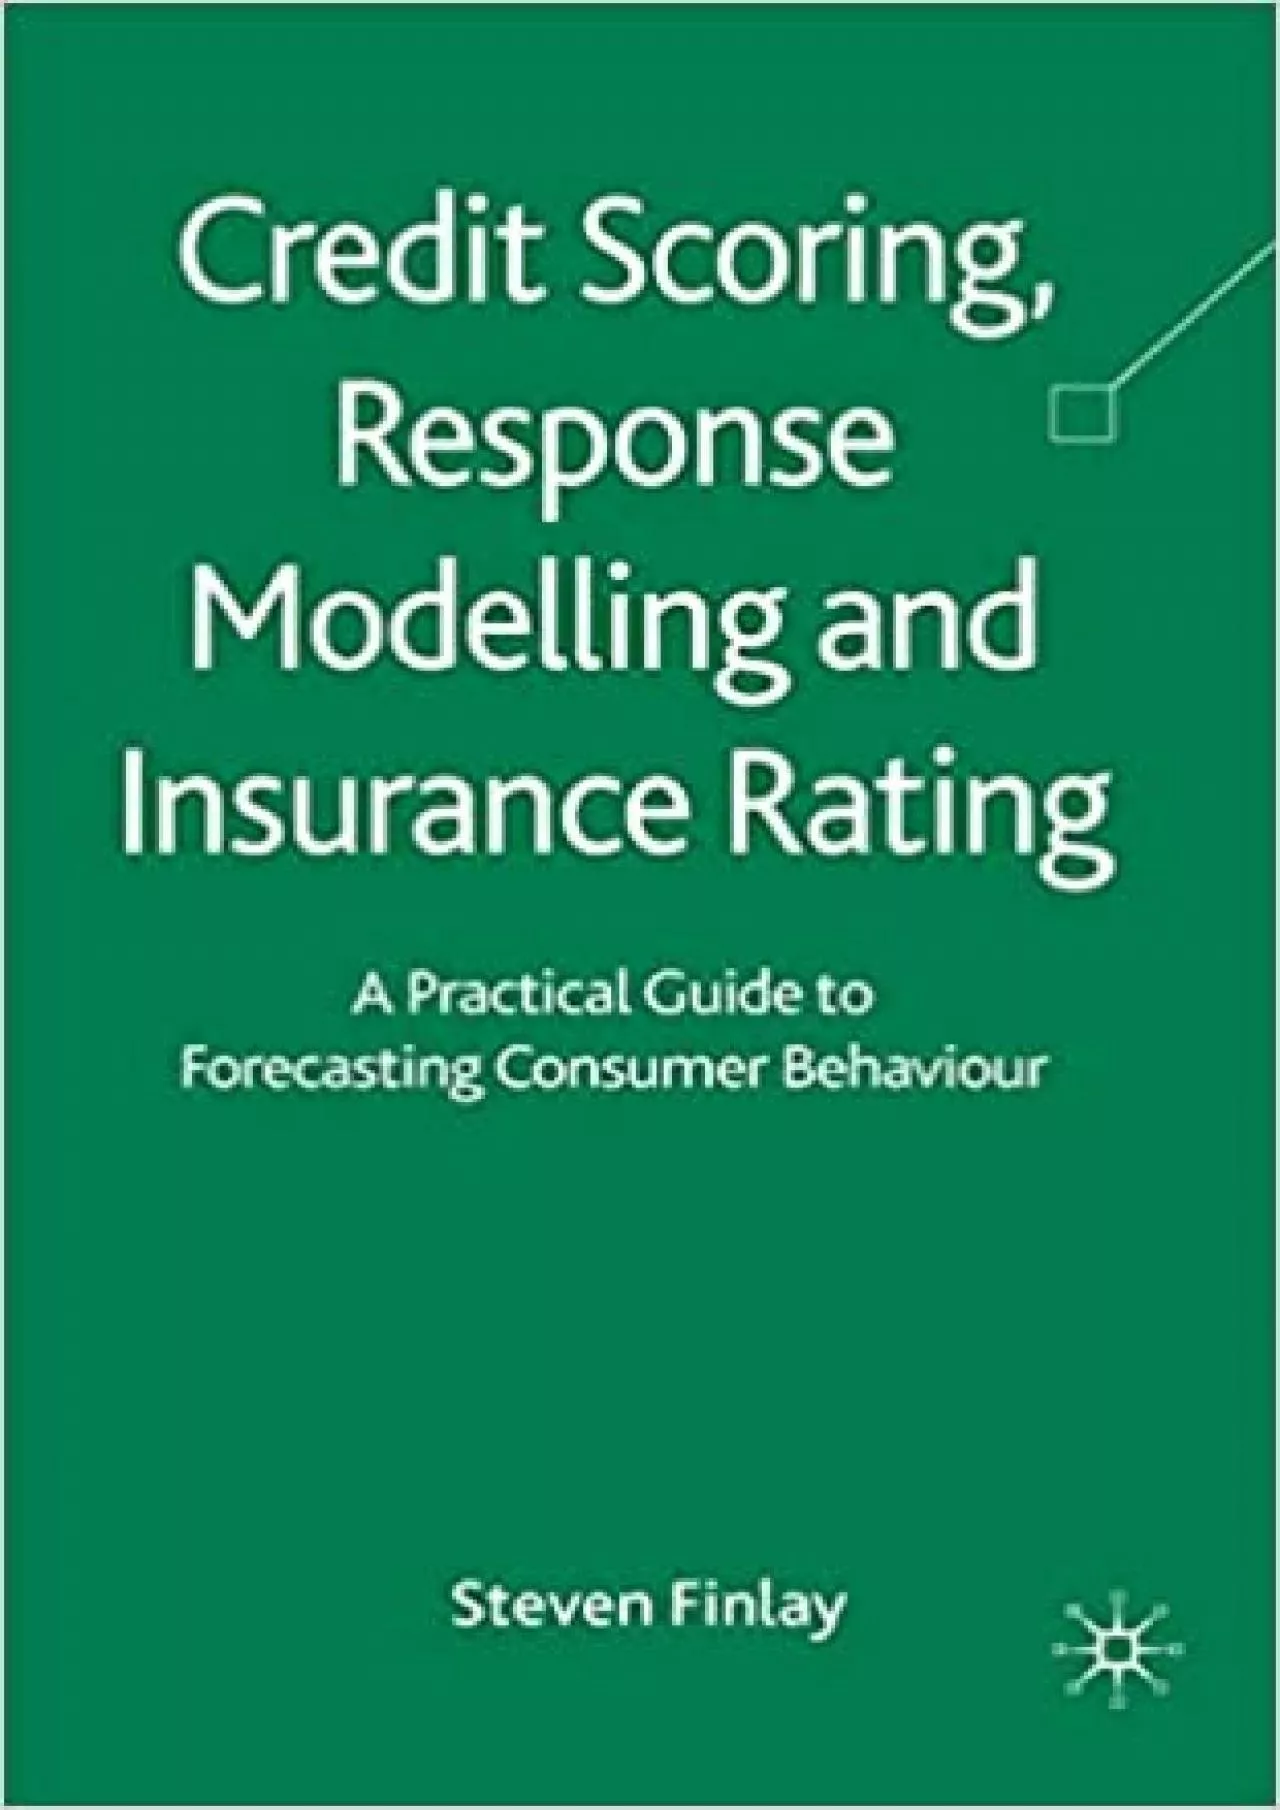 Credit Scoring Response Modelling and Insurance Rating: A Practical Guide to Forecasting